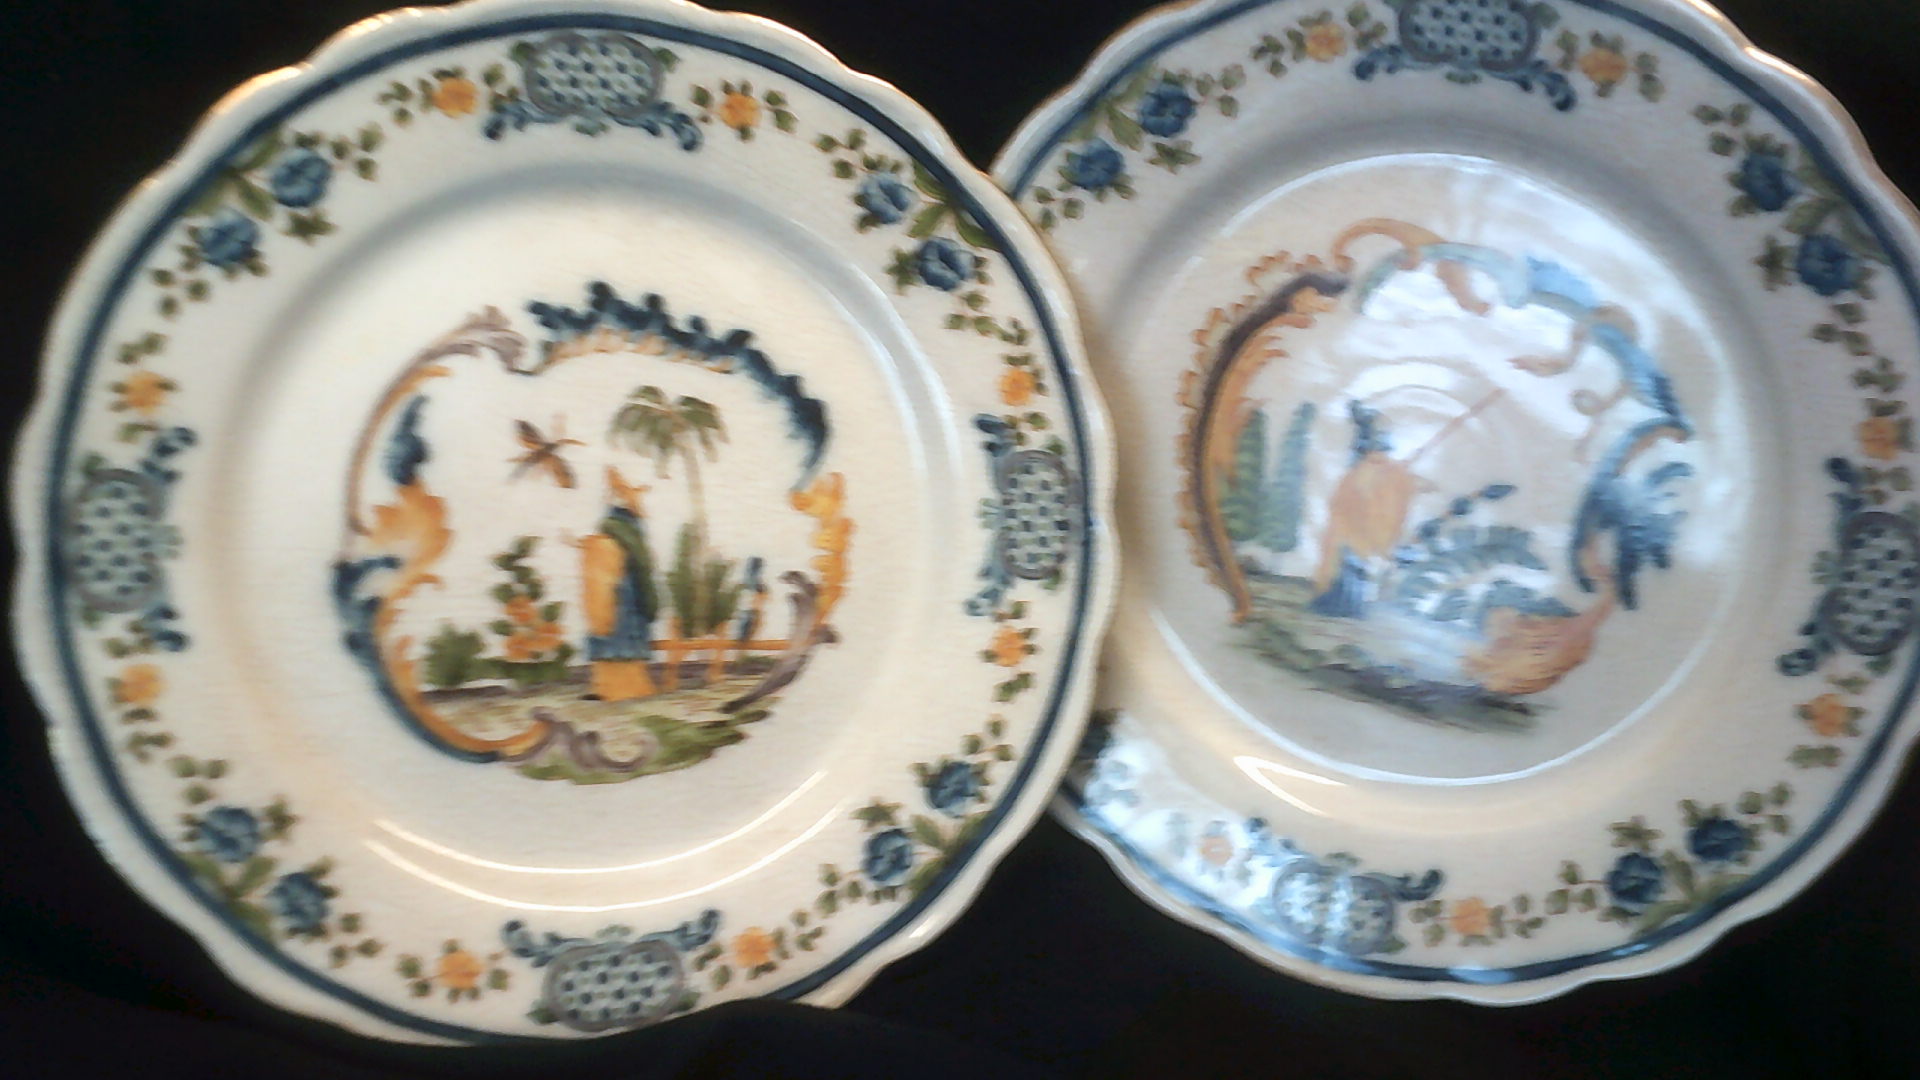 Pottery Plates (2) with a Chinese design early 1900's mark on back but unable to trace maker